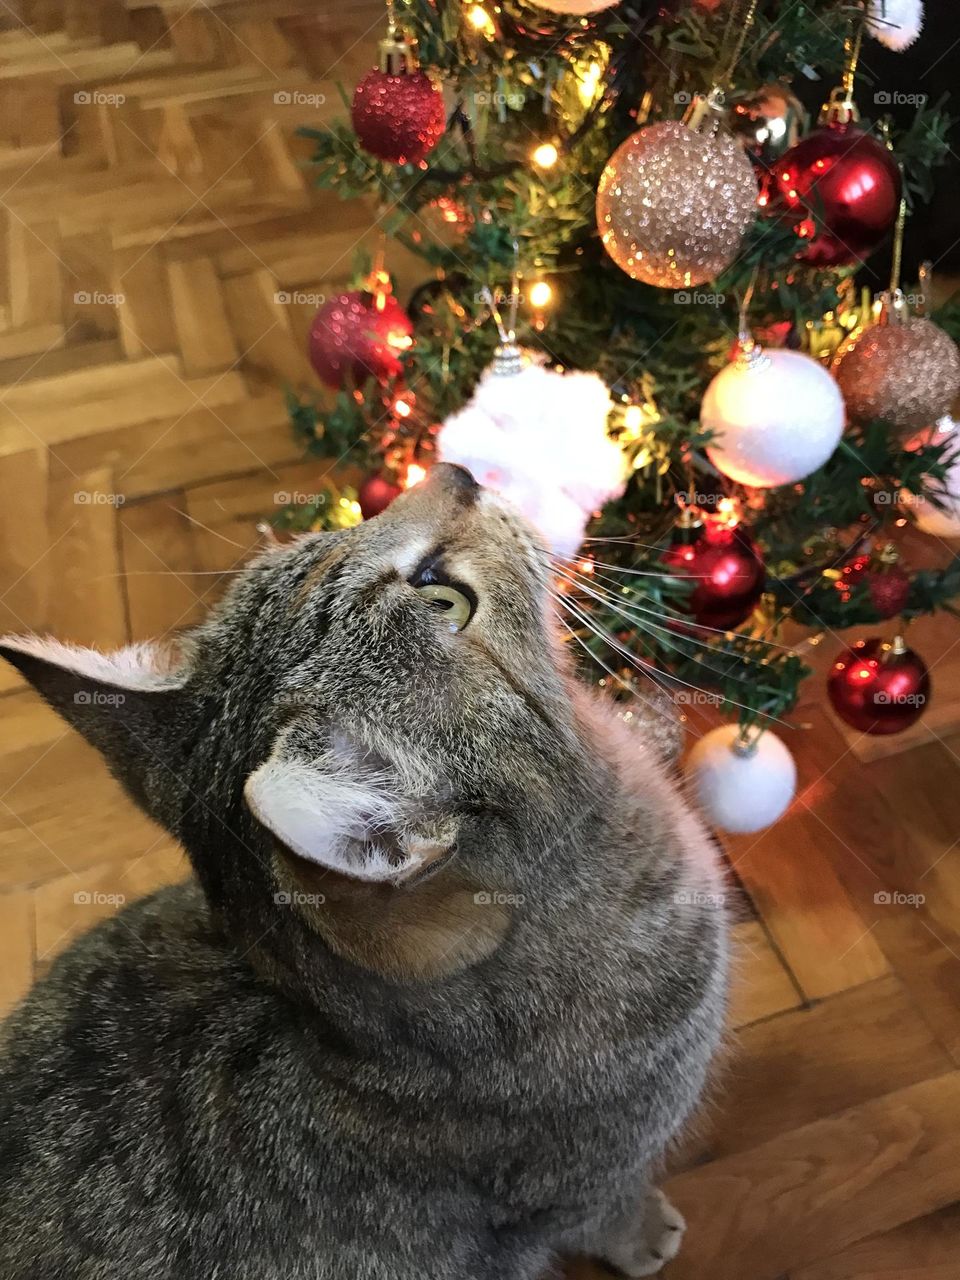 A cat by the Christmas tree.